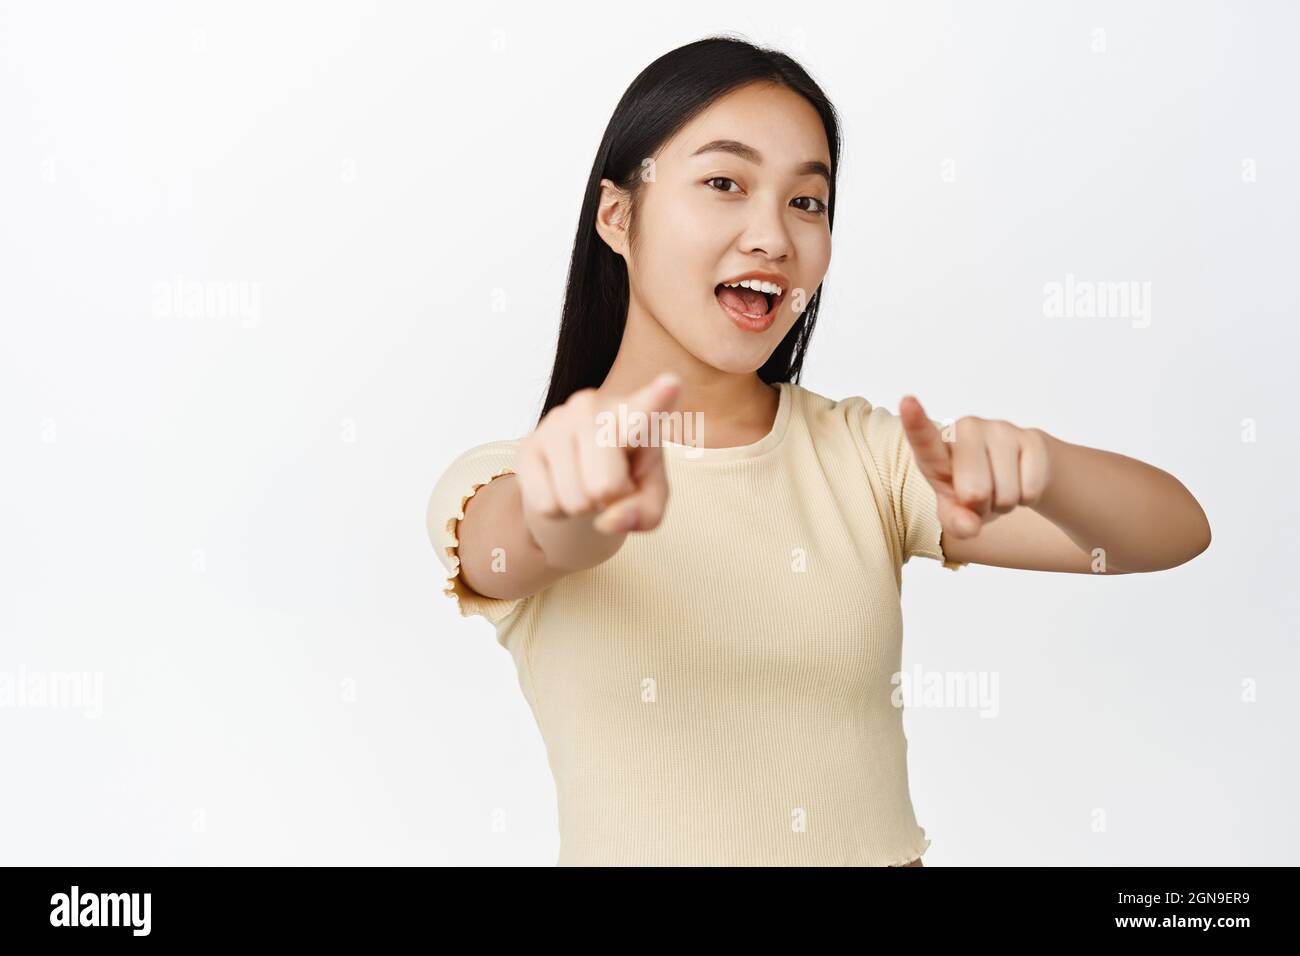 Close up portrait of brunette smiling girl, pointing fingers at camera, choosing you, inviting to event, standing in t-shirt over white background Stock Photo